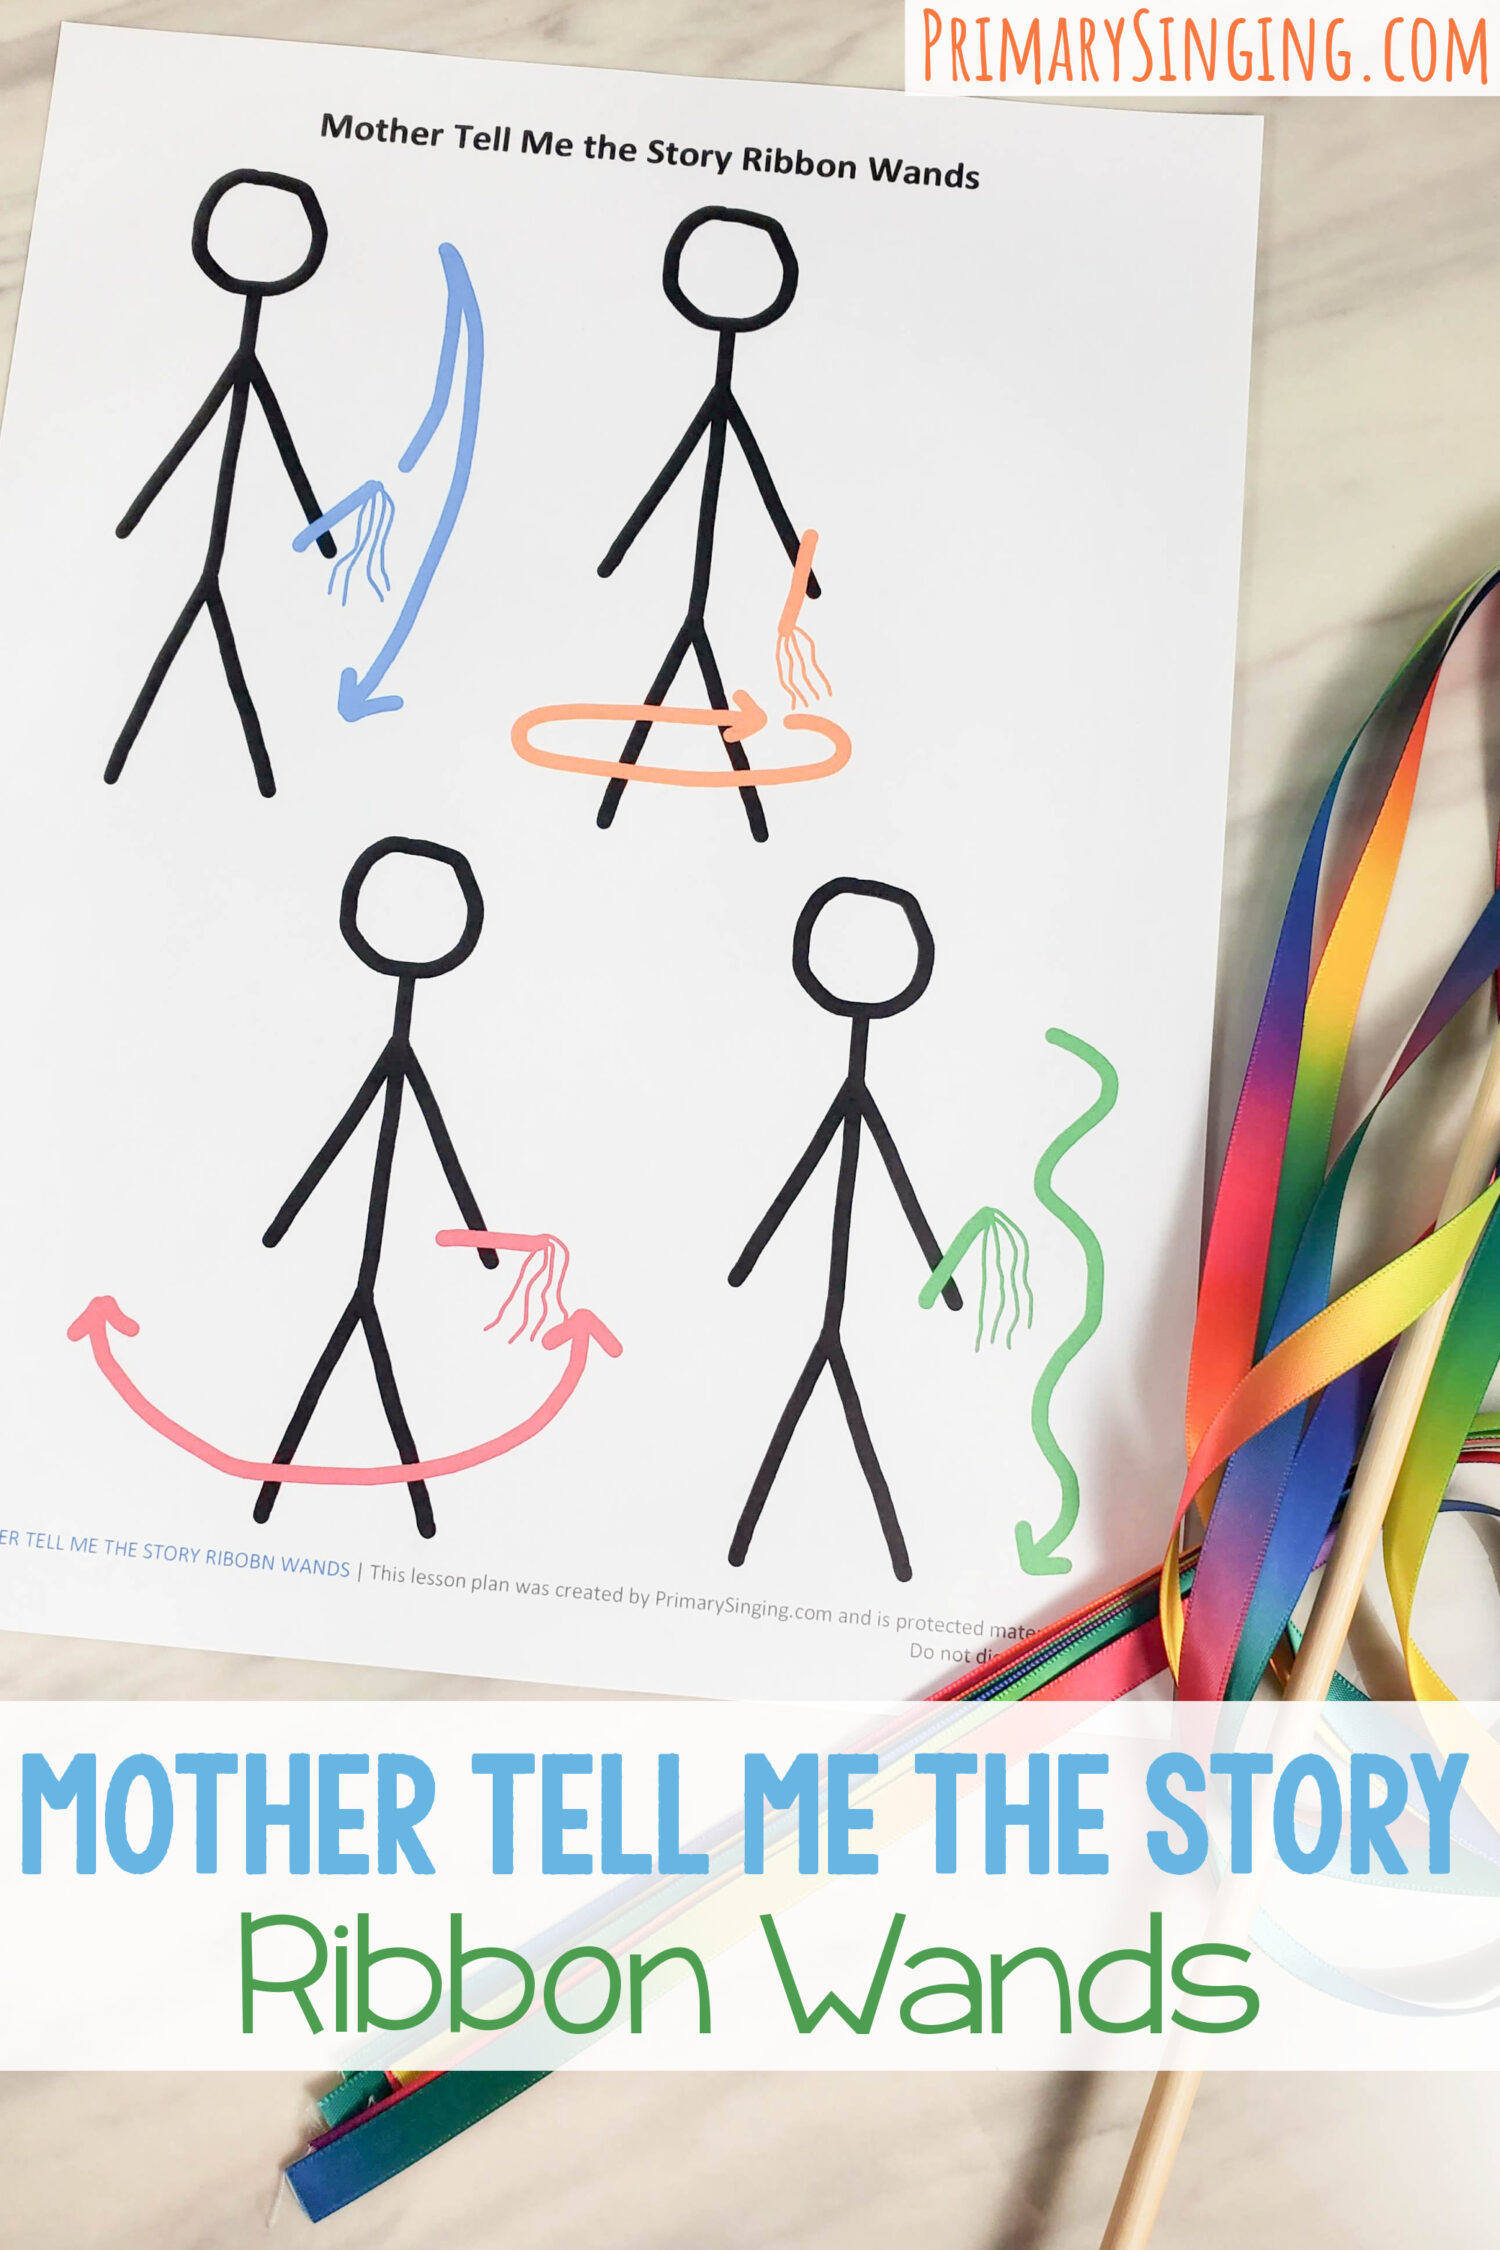 Mother Tell Me the Story Ribbon Wands singing time idea - Use these fun movements with ribbon wands that follow along with the melody and match the lyrics. This printable chart makes it easy for LDS Primary music leaders and the kiddos to follow along.